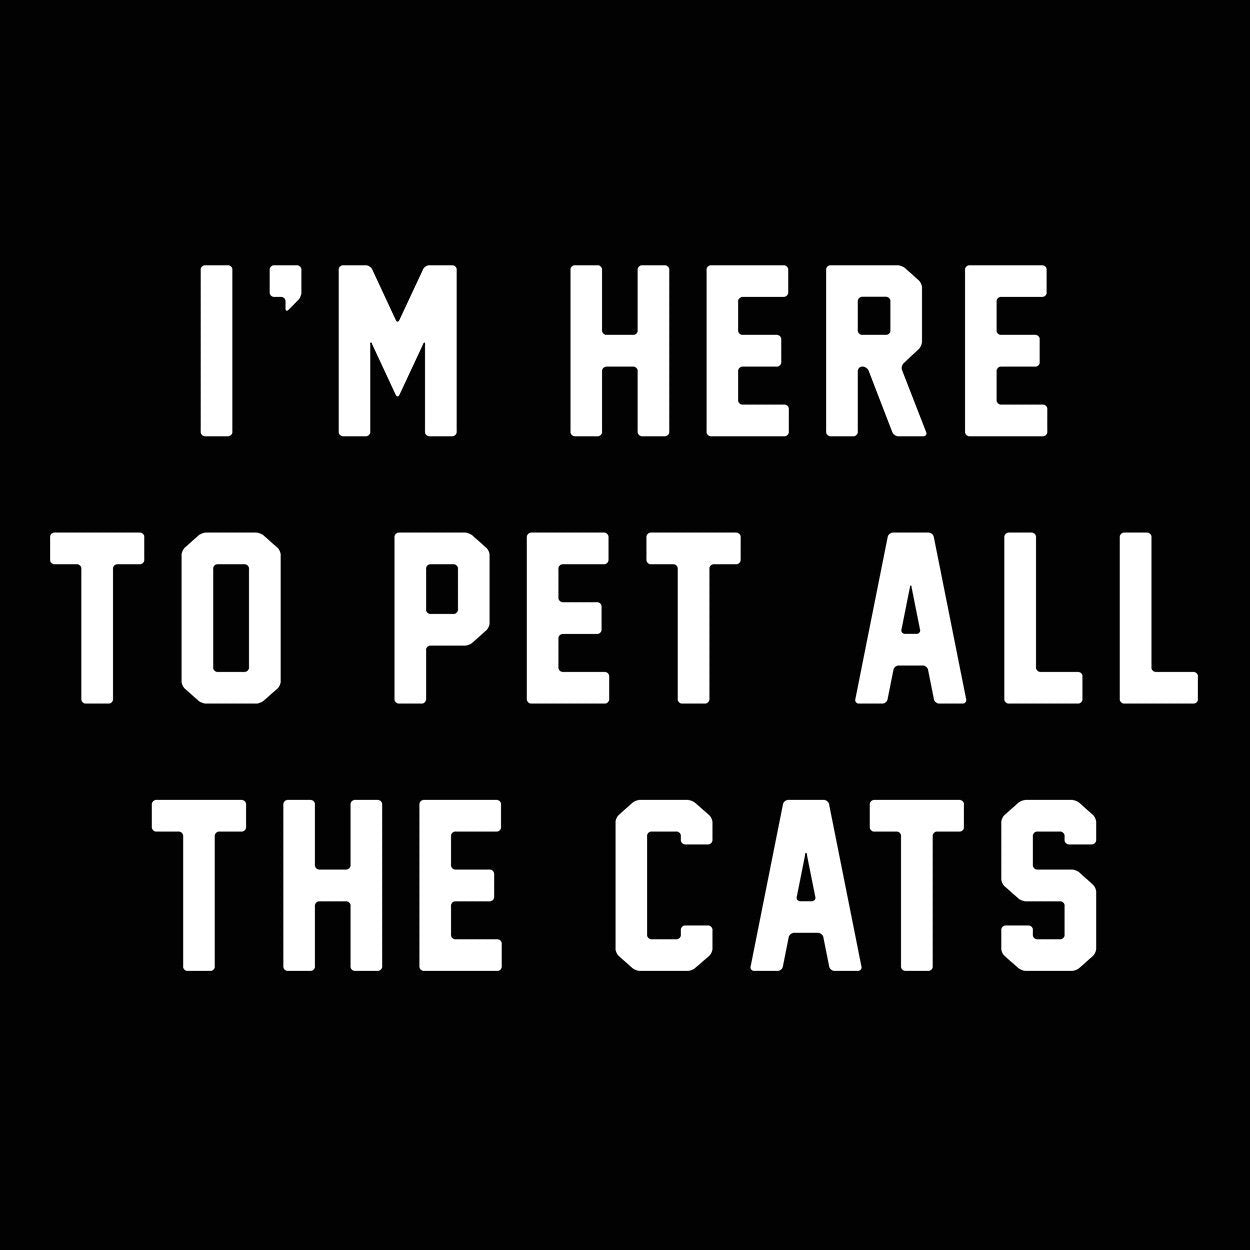 I'm Here To Pet All The Cats Women's Fit T-Shirt